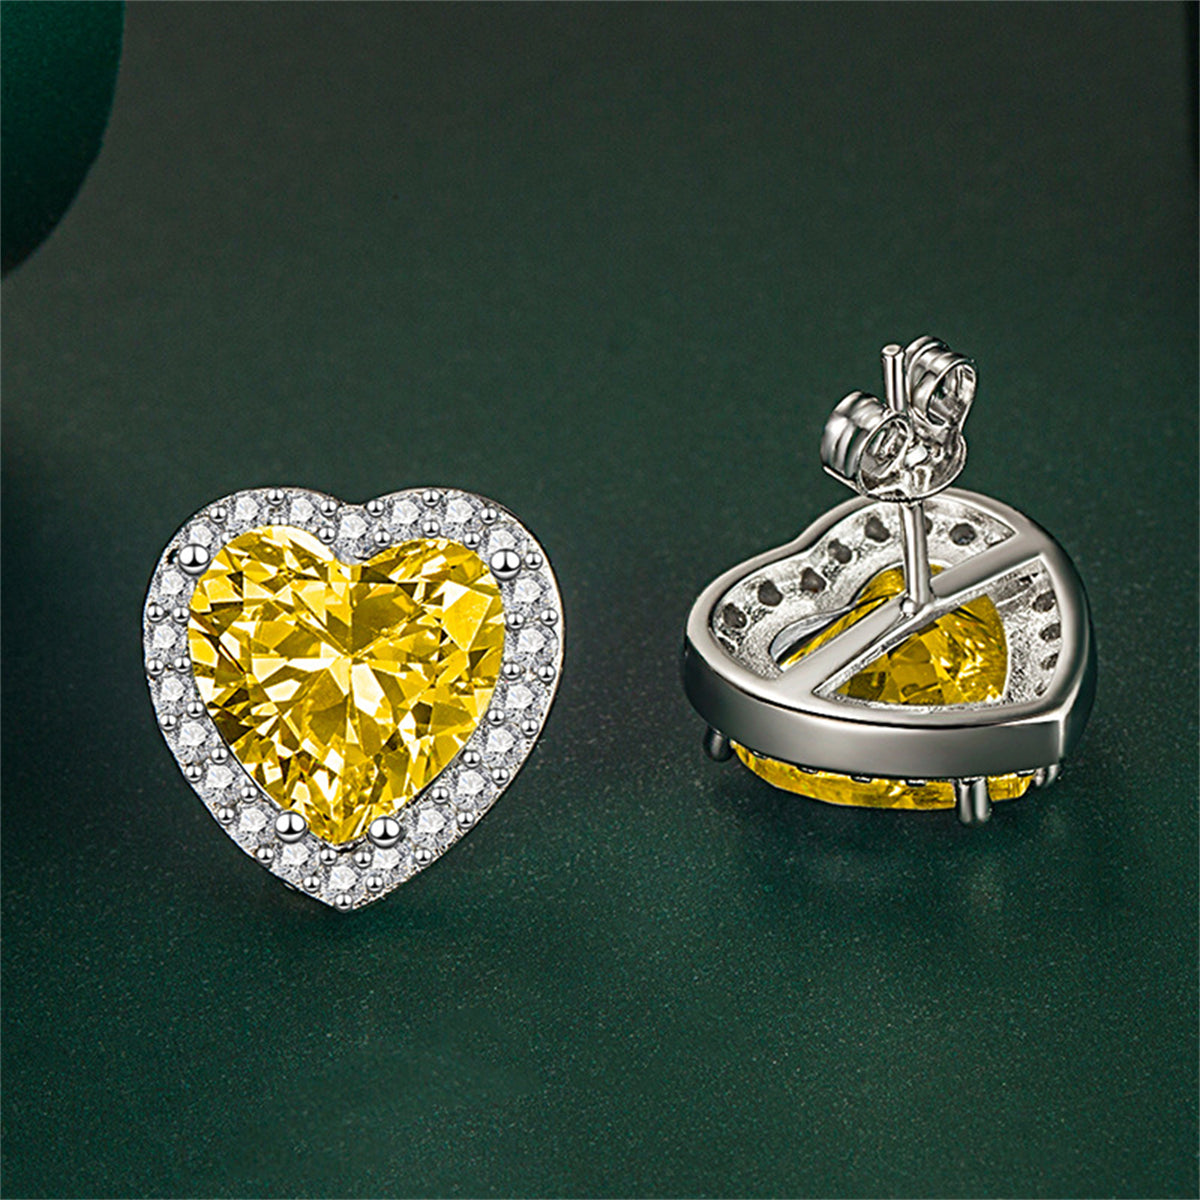 Yellow Crystal & Cubic Zirconia Silver-Plated Halo Heart Stud Earrings